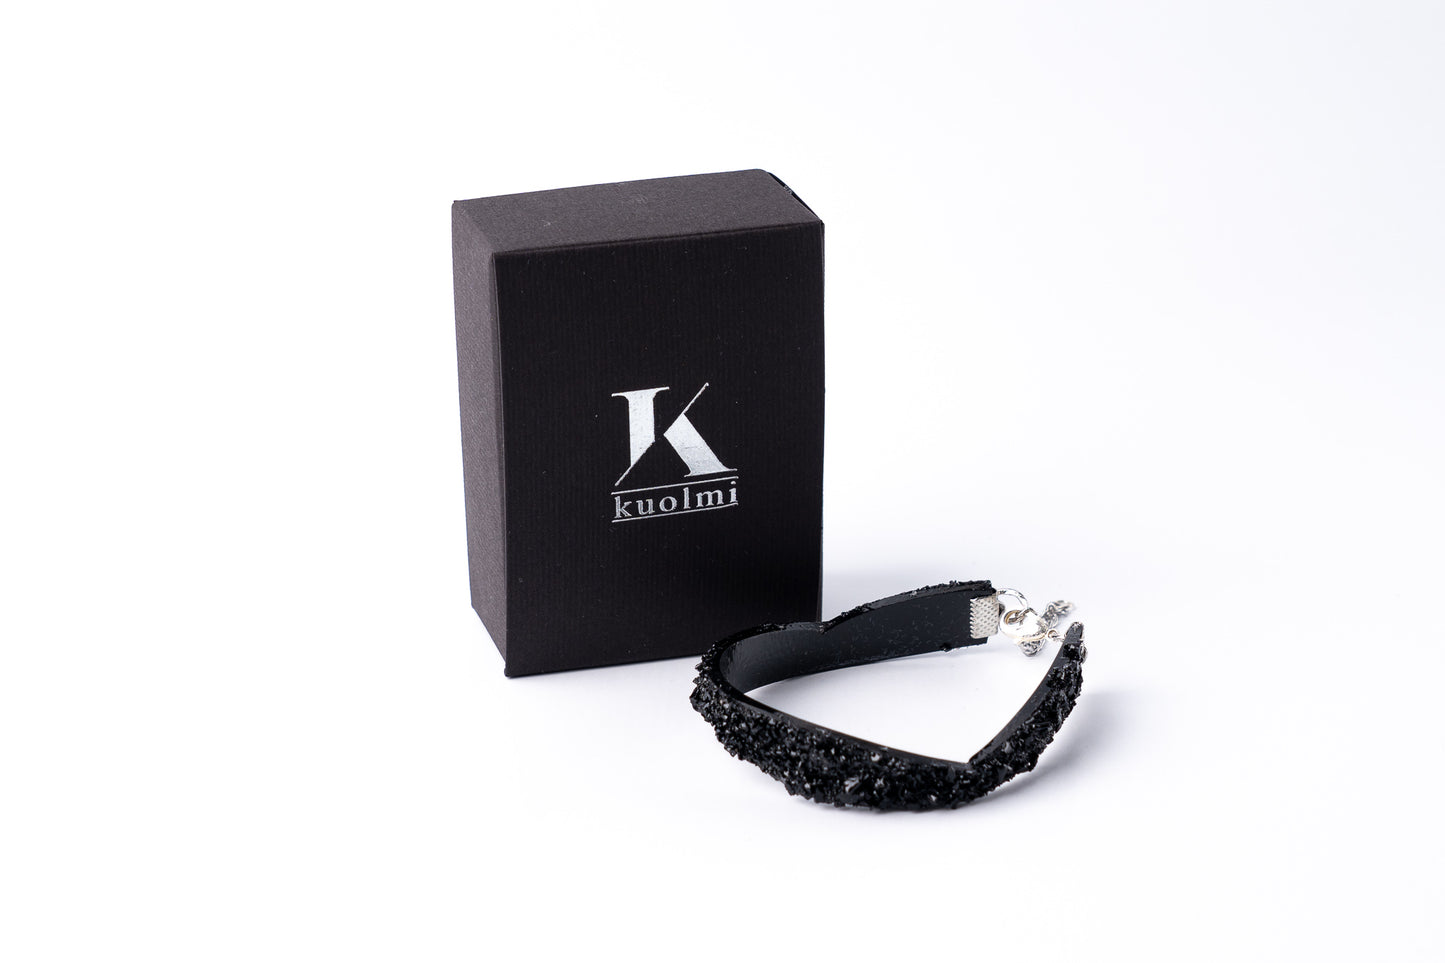 The KUOLMi Black bracelet is made of 10 million-year-old stone.  Due to its black luster and special organic shape, each piece is unique and unrepeatable in its appearance. It is made entirely by hand from coal and stainless steel. The size is adjustable. Jewelry is packaged in a gift box. The story about coal from which the bracelet was made is included as a gift.    Mighty and powerful.